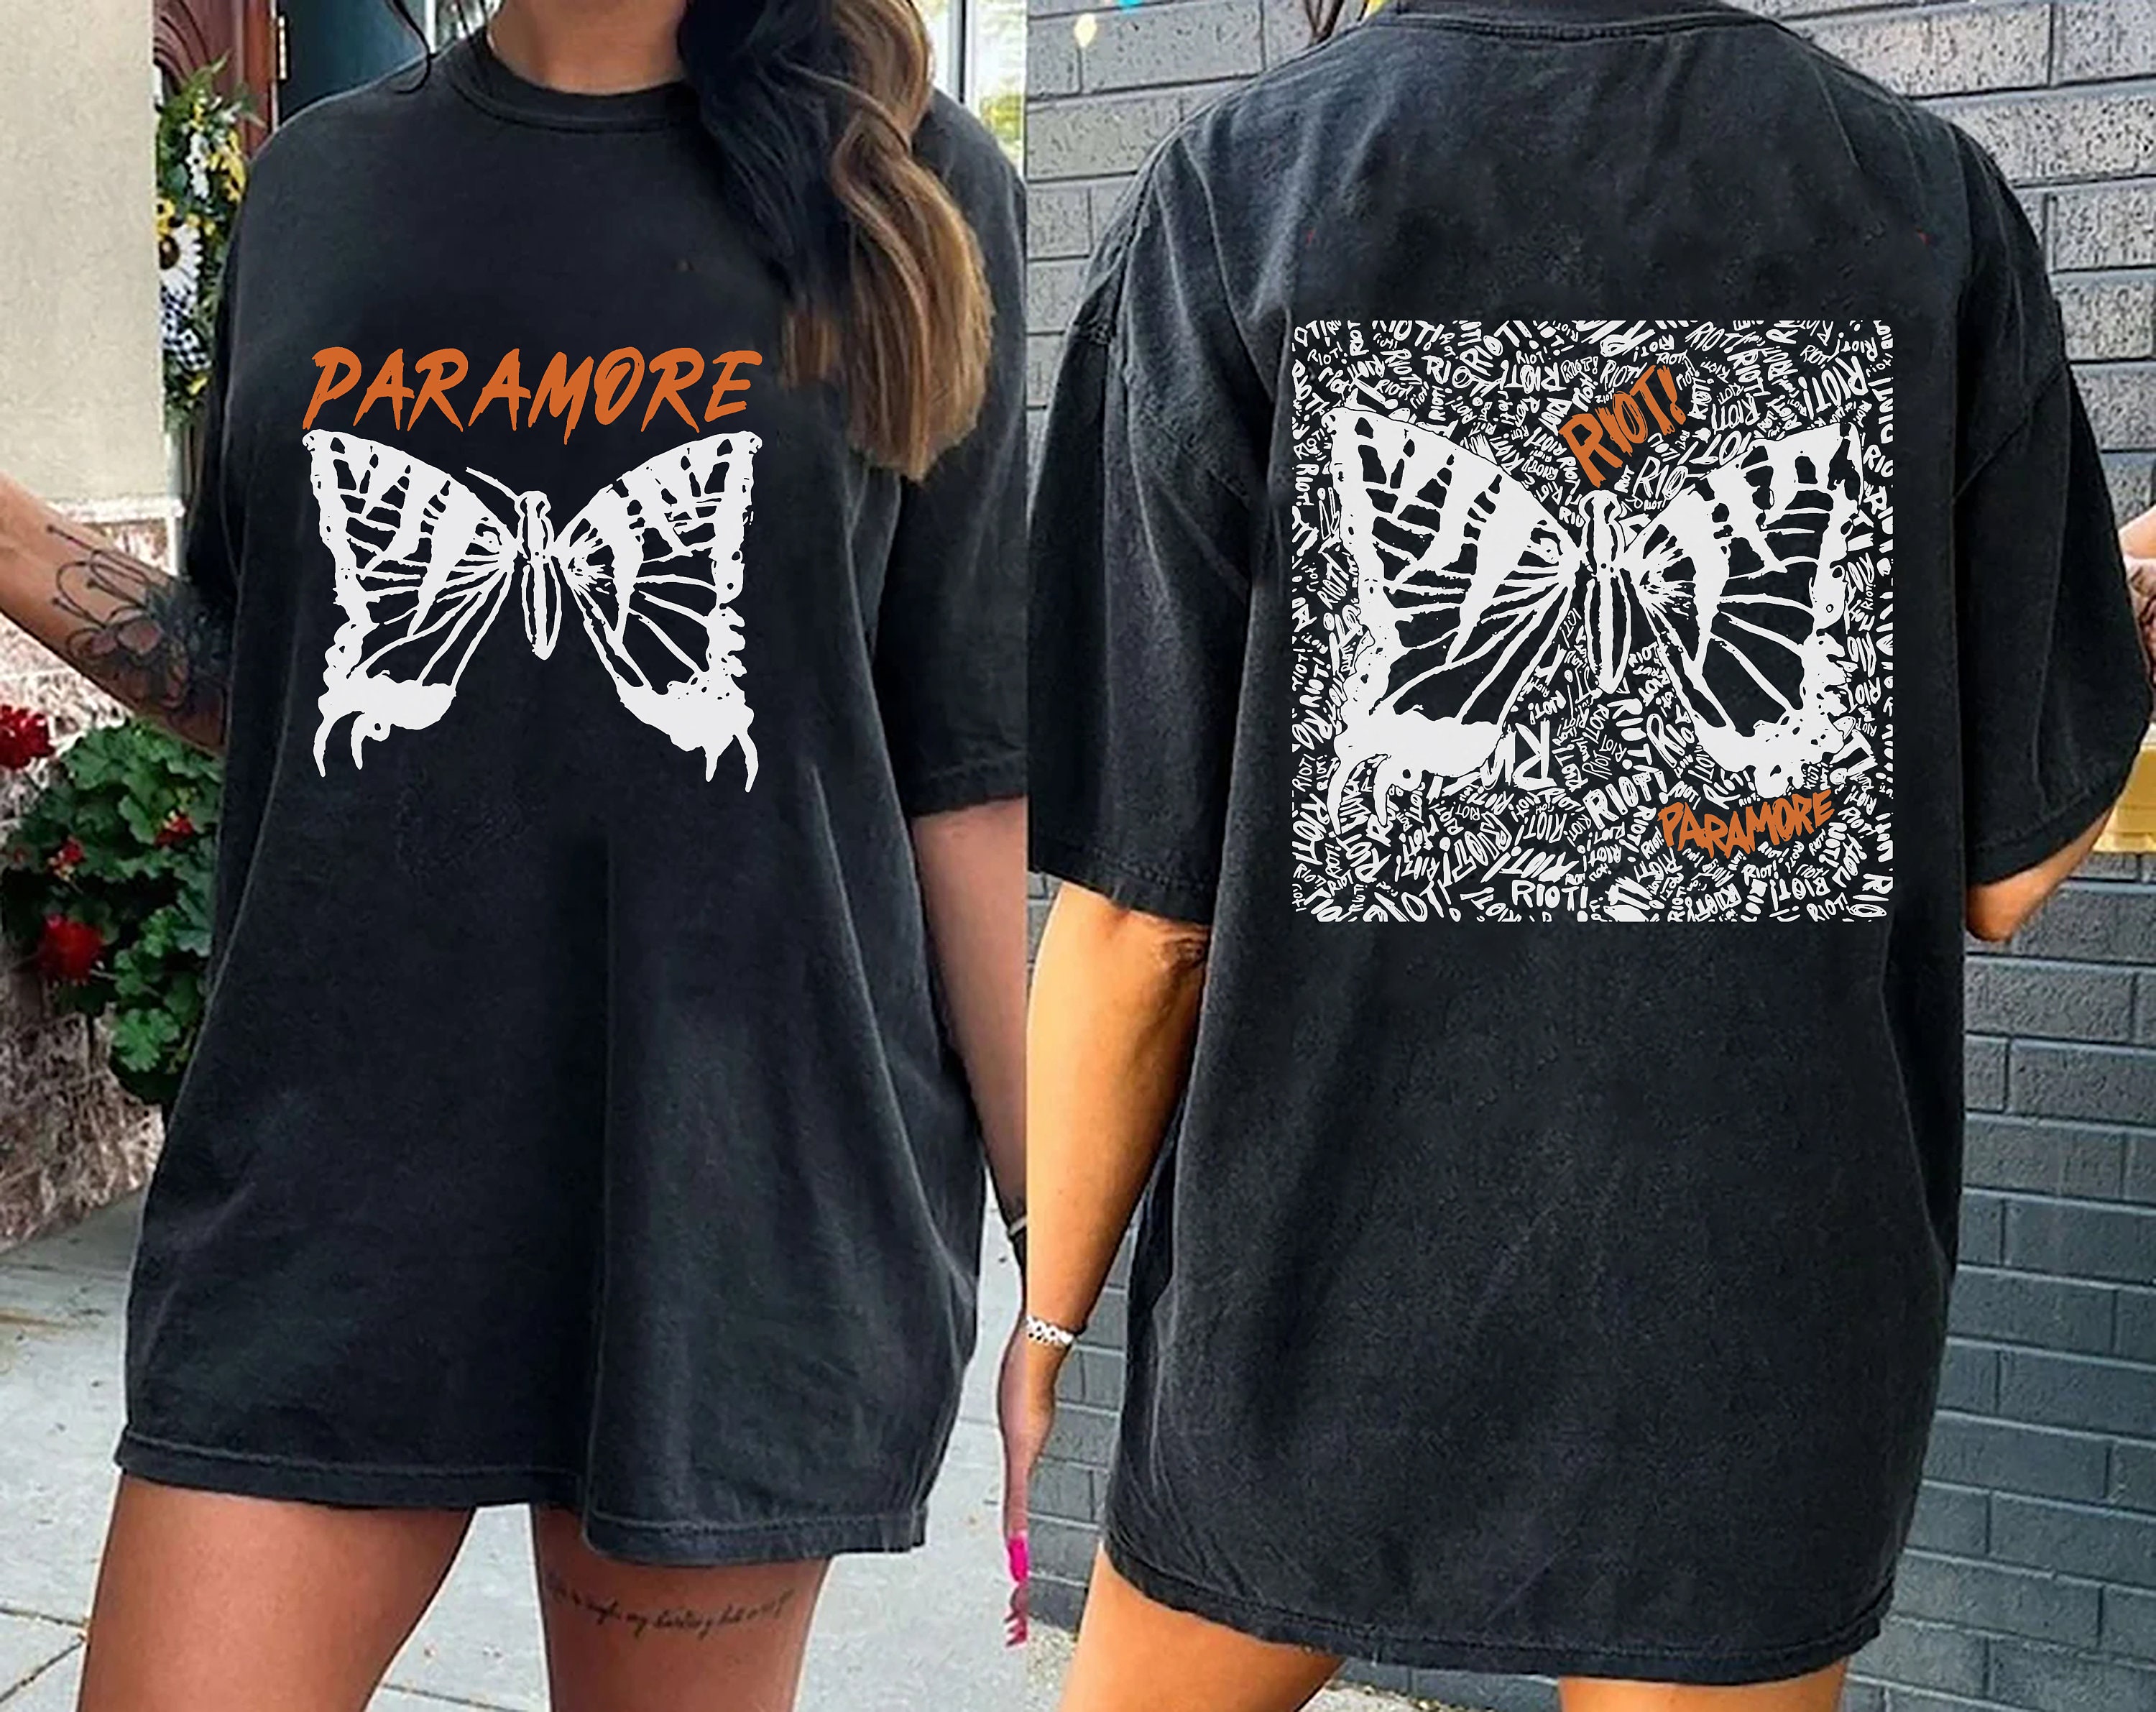 Paramore Tattoo Shirt, Paramore Tour 2 Sides Shirt sold by